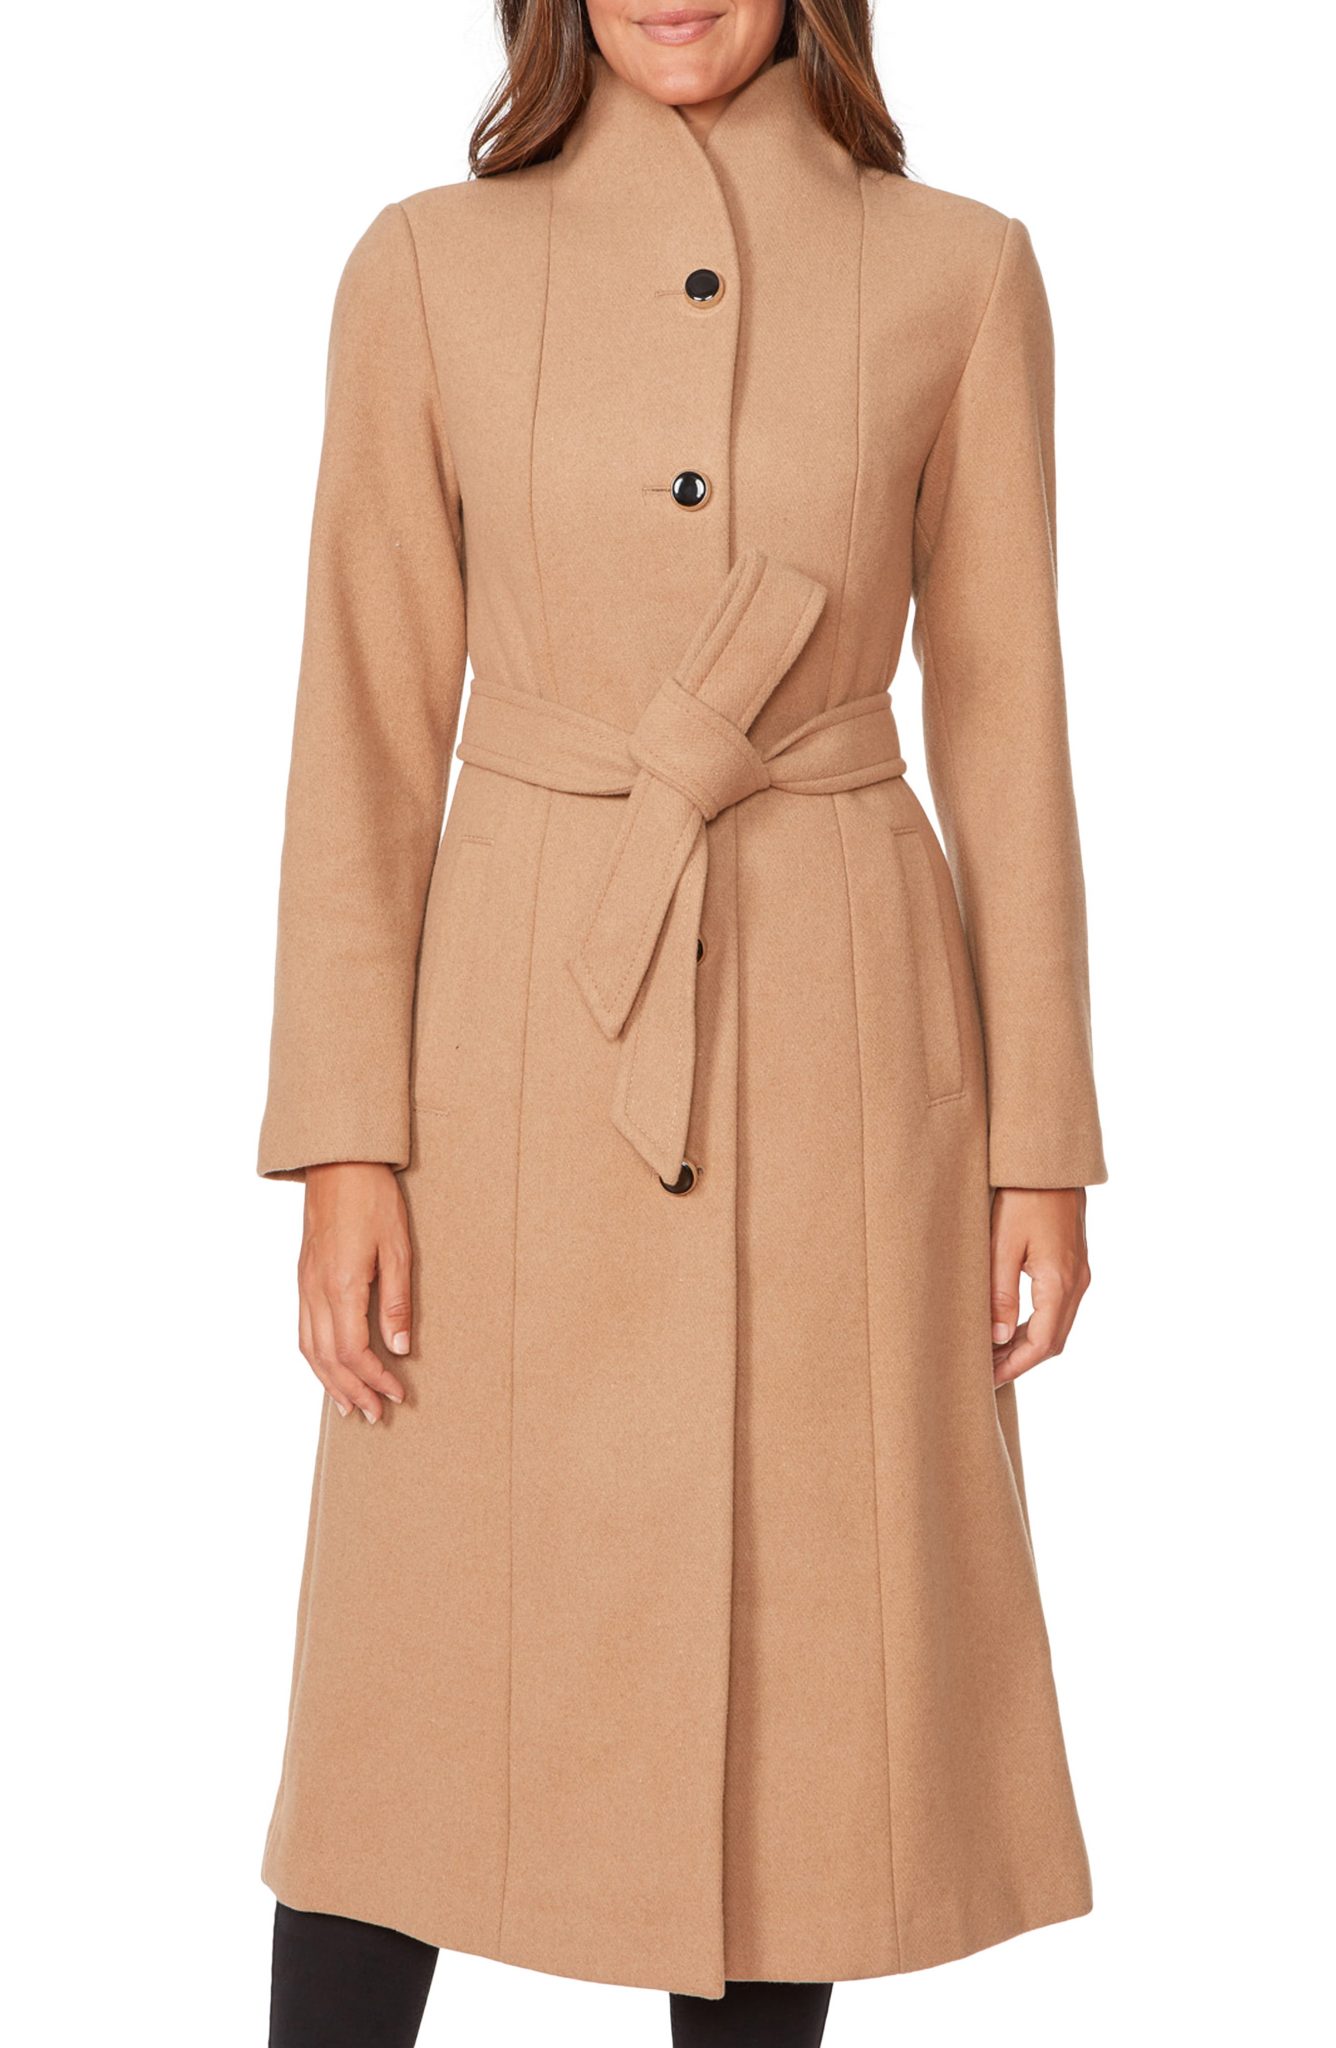 Women’s Kate Spade New York Belted Wool Blend Coat, Size X-Small ...